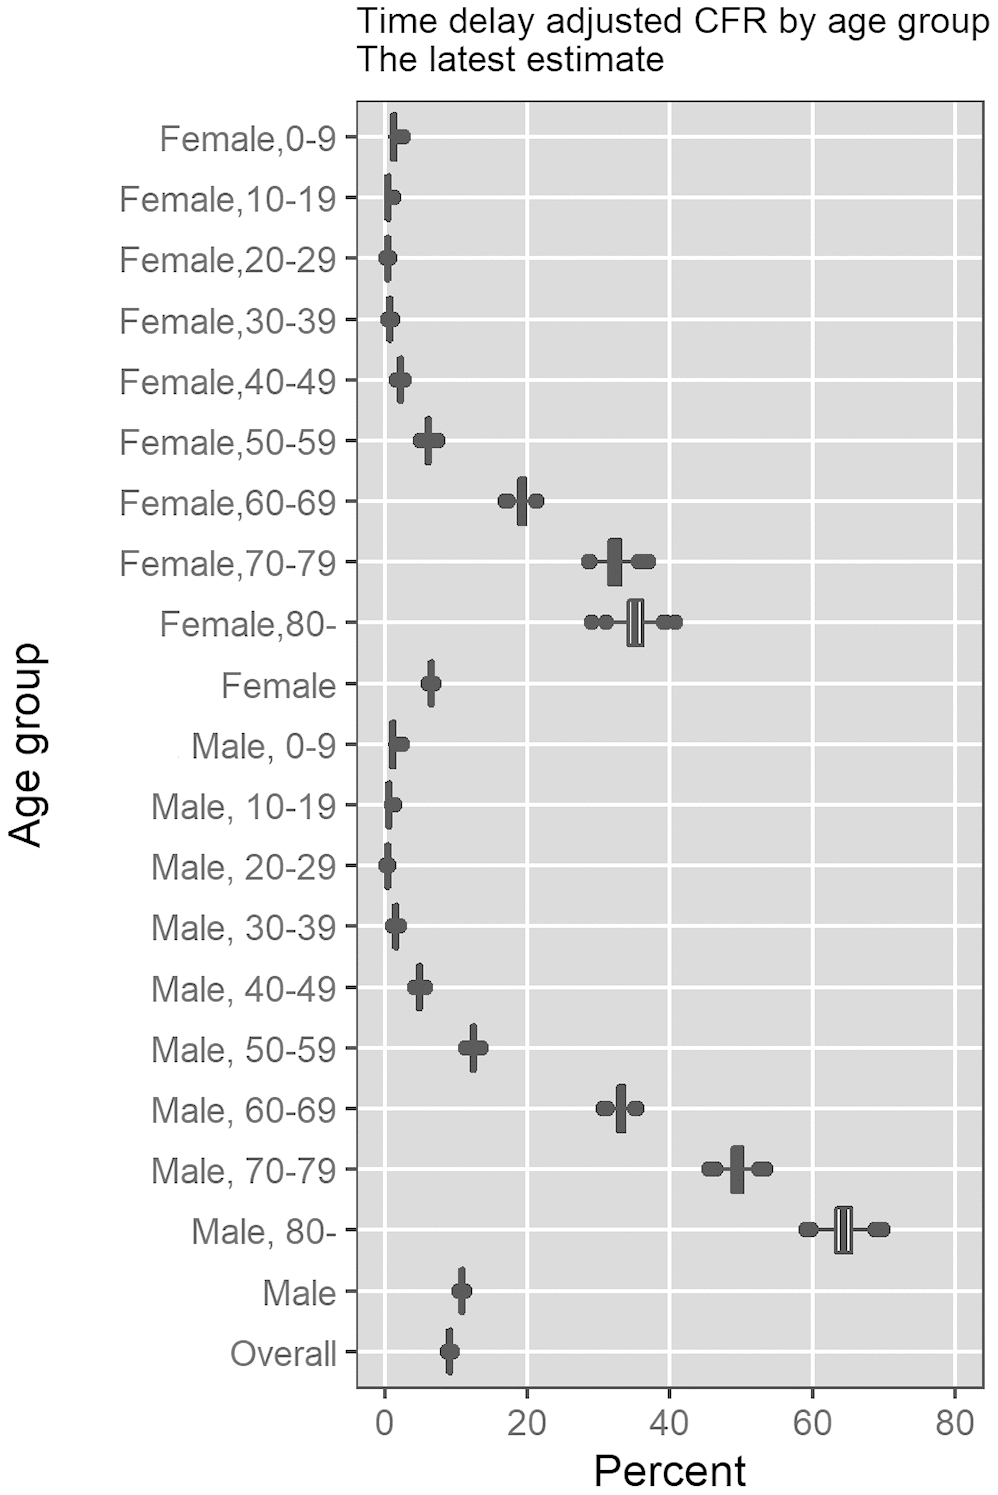 Most recent estimates of time-delay adjusted risk of death caused by CoVID-19 by age group and gender, March-May 2020, Peru. Distribution of time-delay adjusted risk of death from the latest estimates (May 25, 2020) is presented. Top to bottom: female aged 0-9, female aged 10-19, female aged 20-29, female aged 30-39, female aged 40-49, female aged 50-59, female aged 60-69, female aged 70-79, female aged 80 and over, female overall.